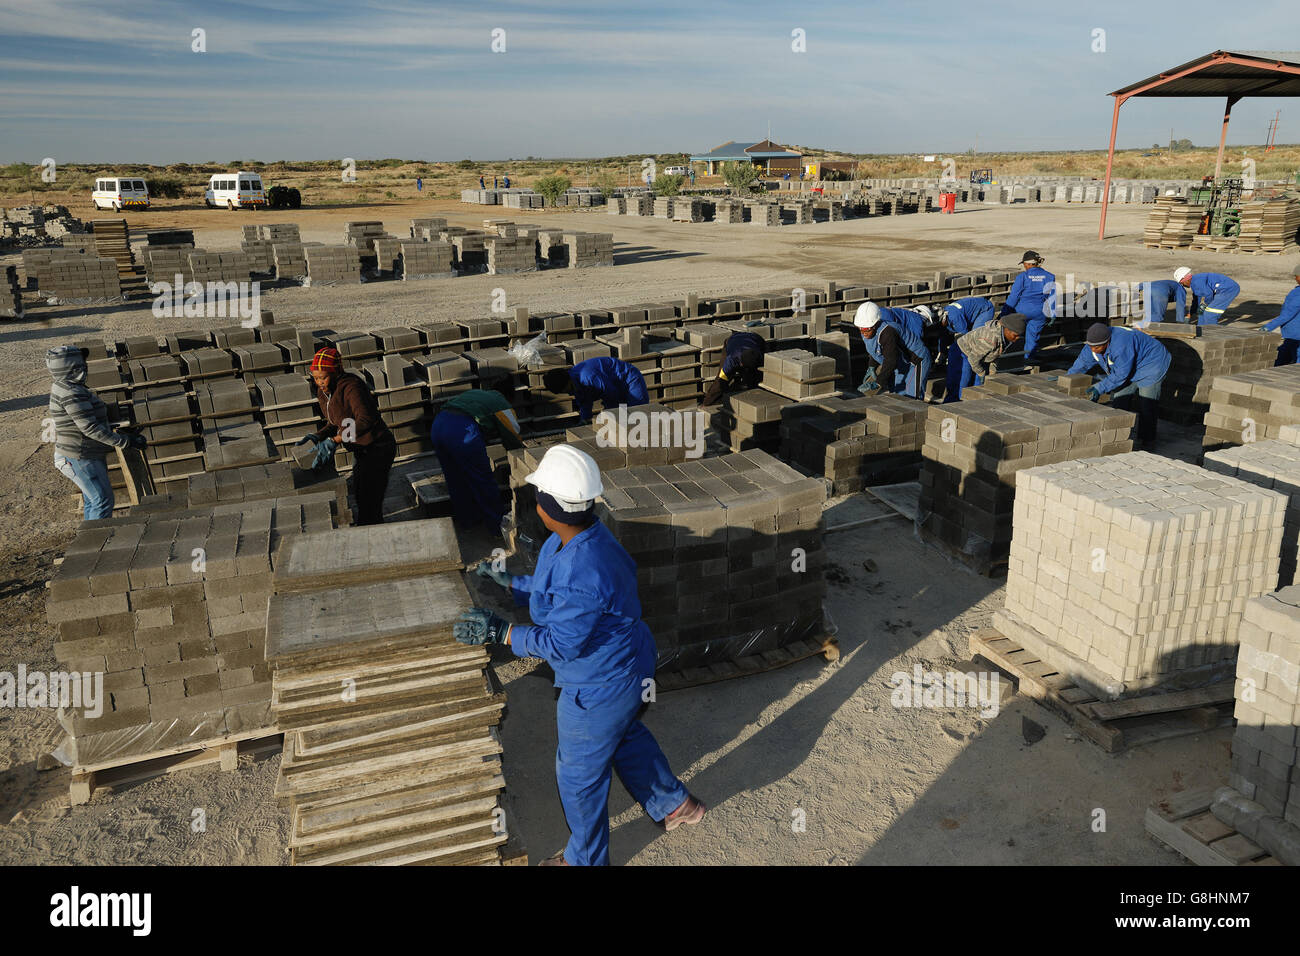 South African Social and Economic Upliftmentment Programme, Low cost housing. Stock Photo